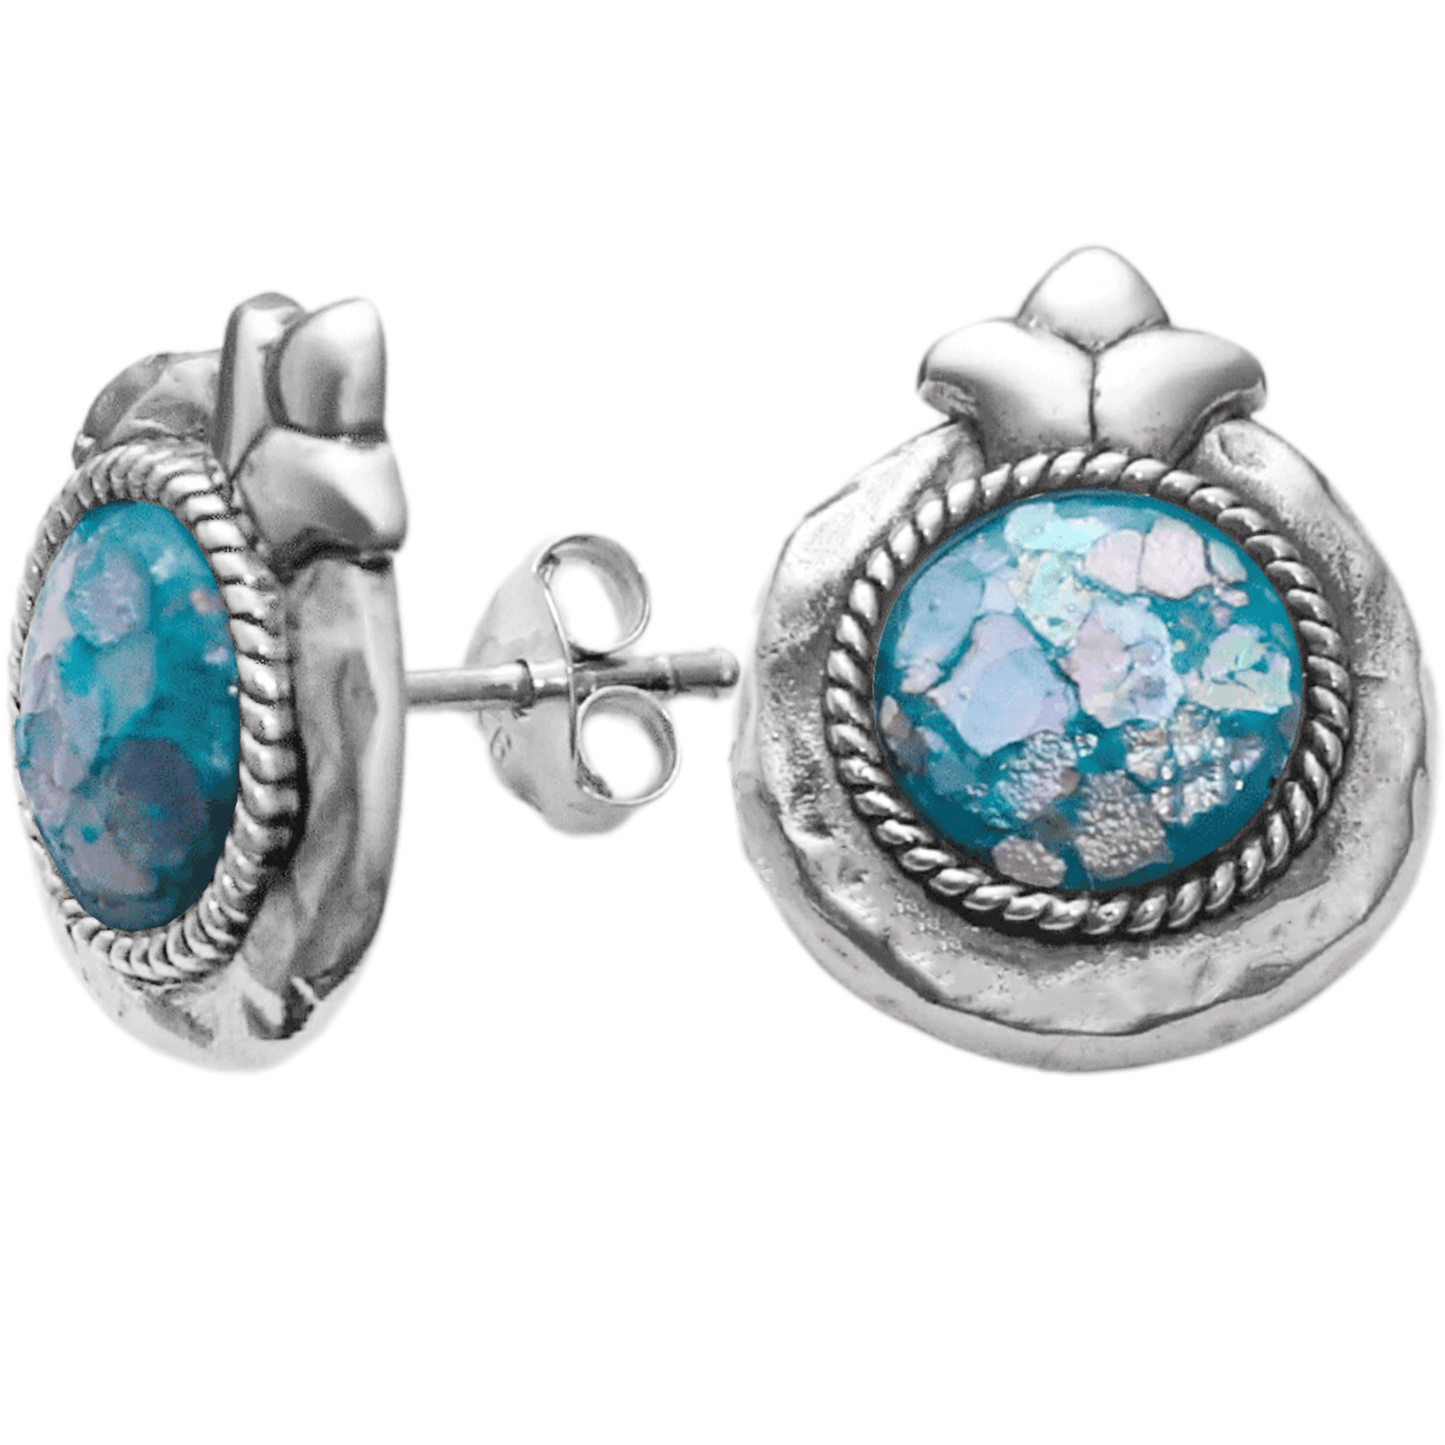 Pomegranate-shaped stud earrings with multicolored roman glass in the center